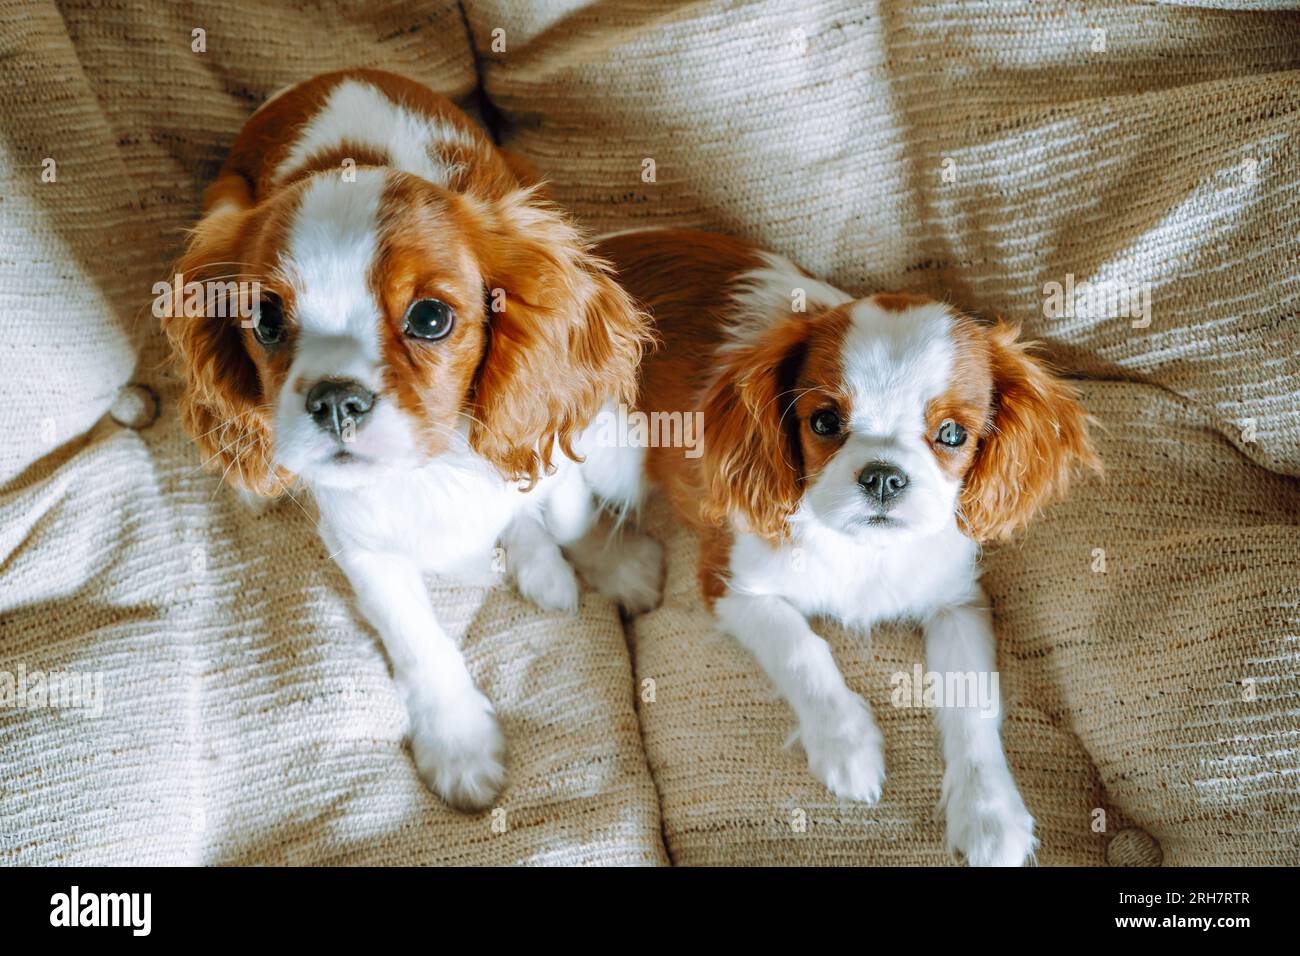 Portrait of two red and white colored little Cavalier King Charles Spaniels sitting together on beige armchair. Loveable and curious puppies looking u Stock Photo